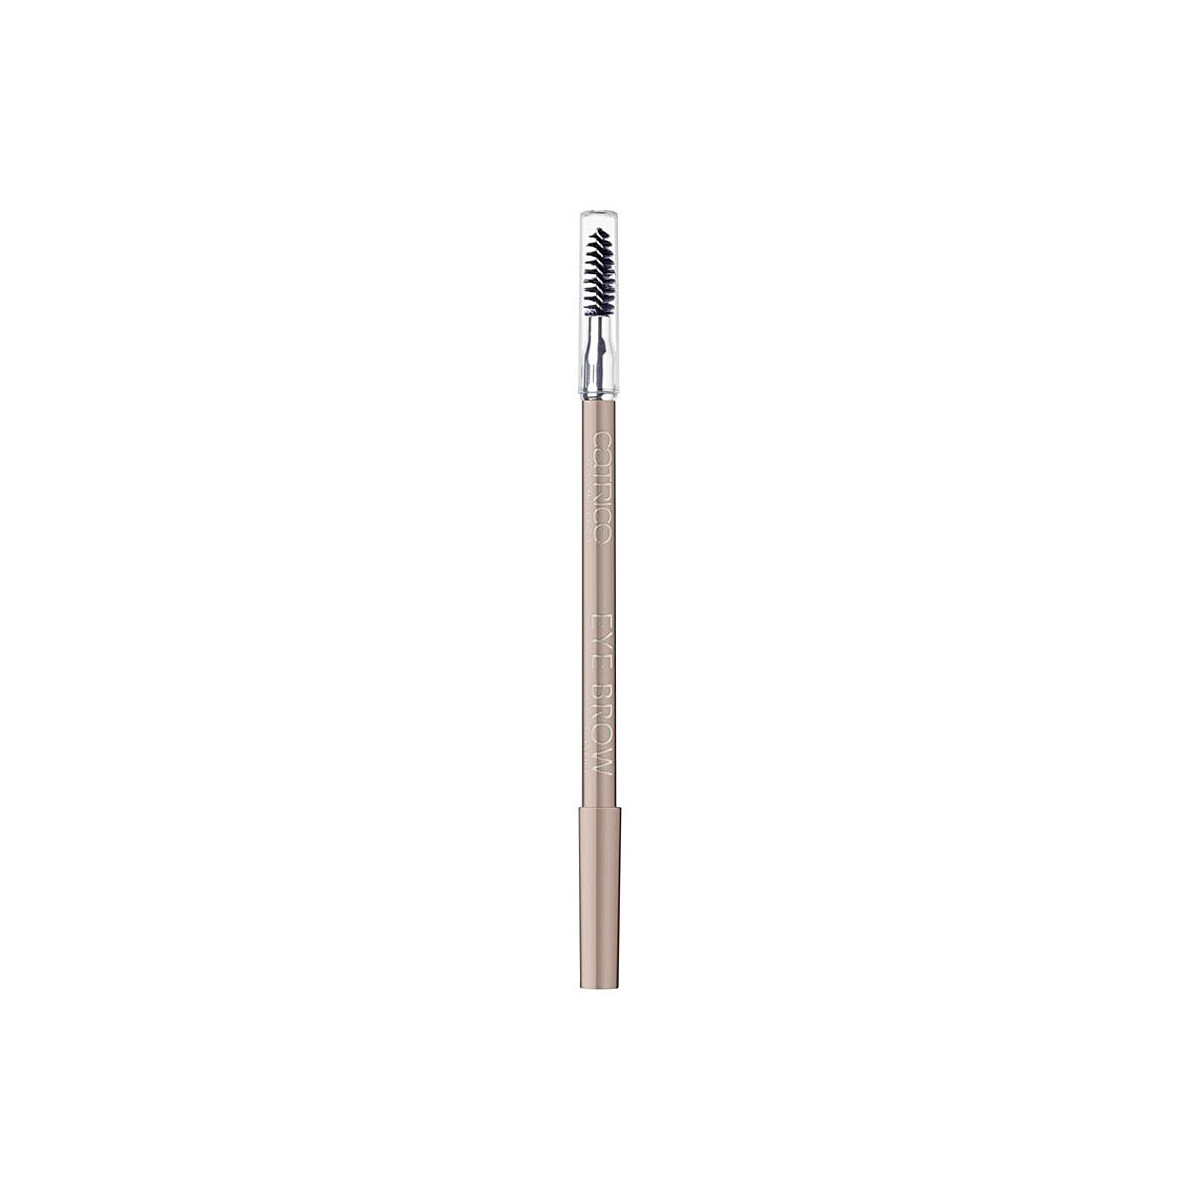 Belleza Mujer Perfiladores cejas Catrice Eye Brow Stylist 020-date With Ash-ton 